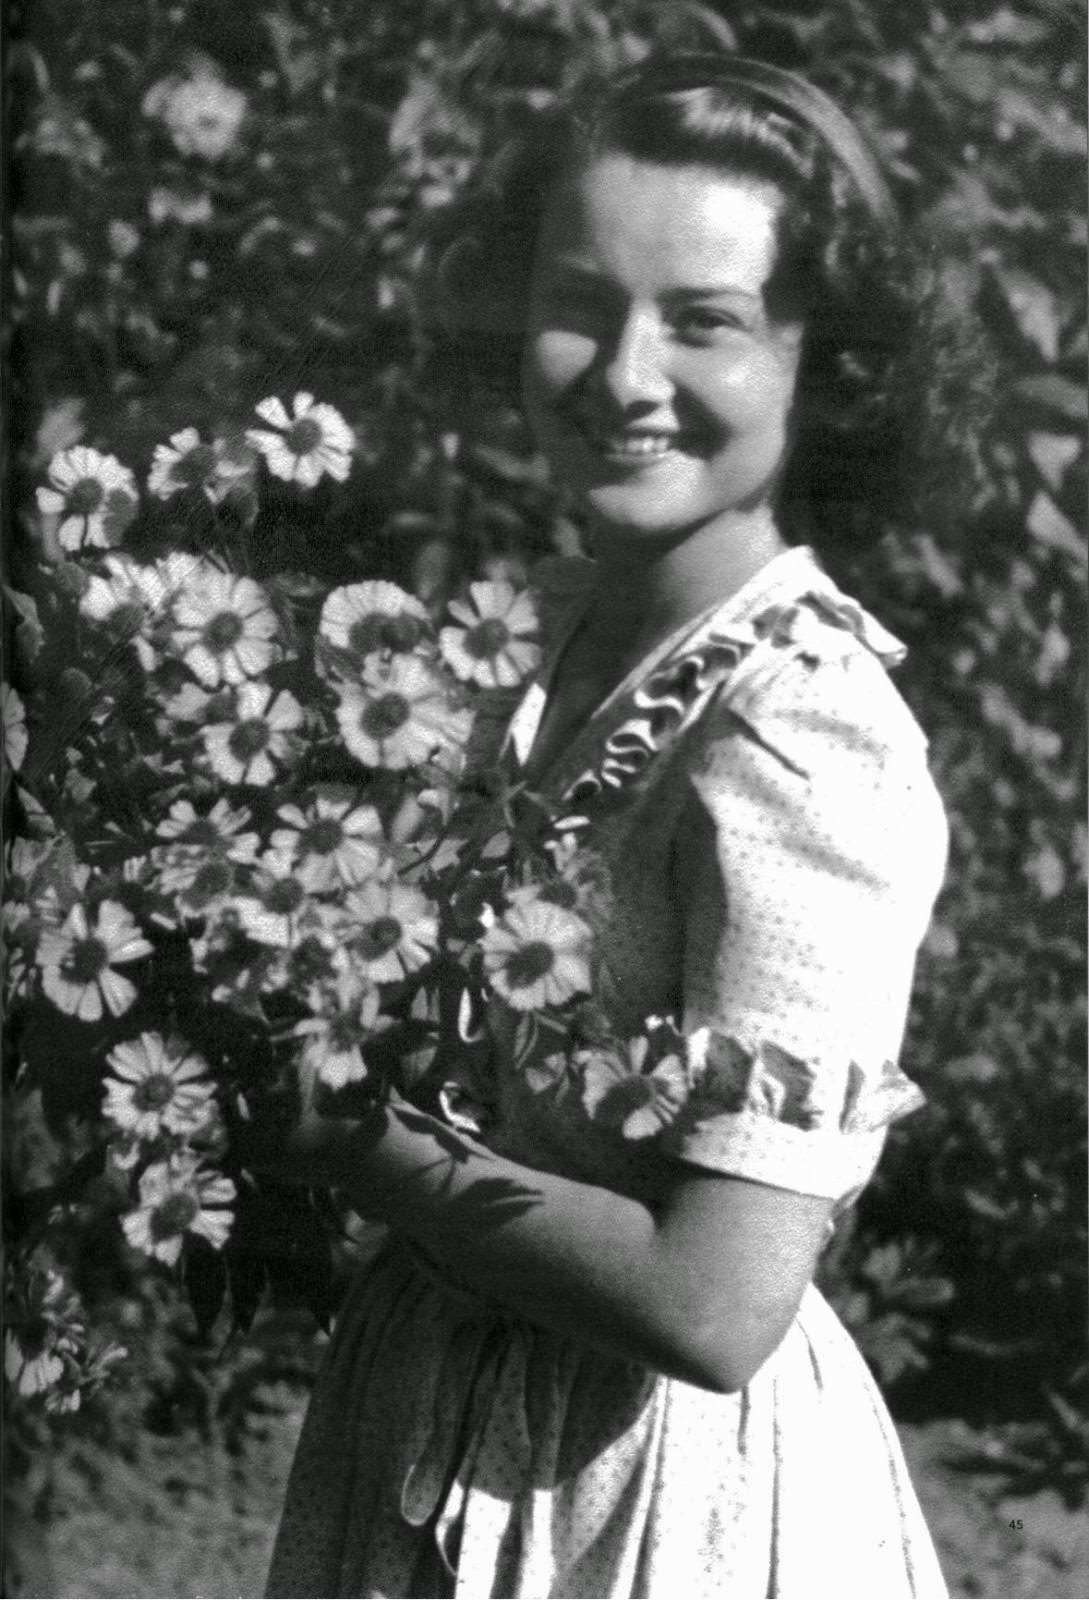 Audrey Hepburn, 17 years old. The photograph was taken after the liberation of Holland, 1946.